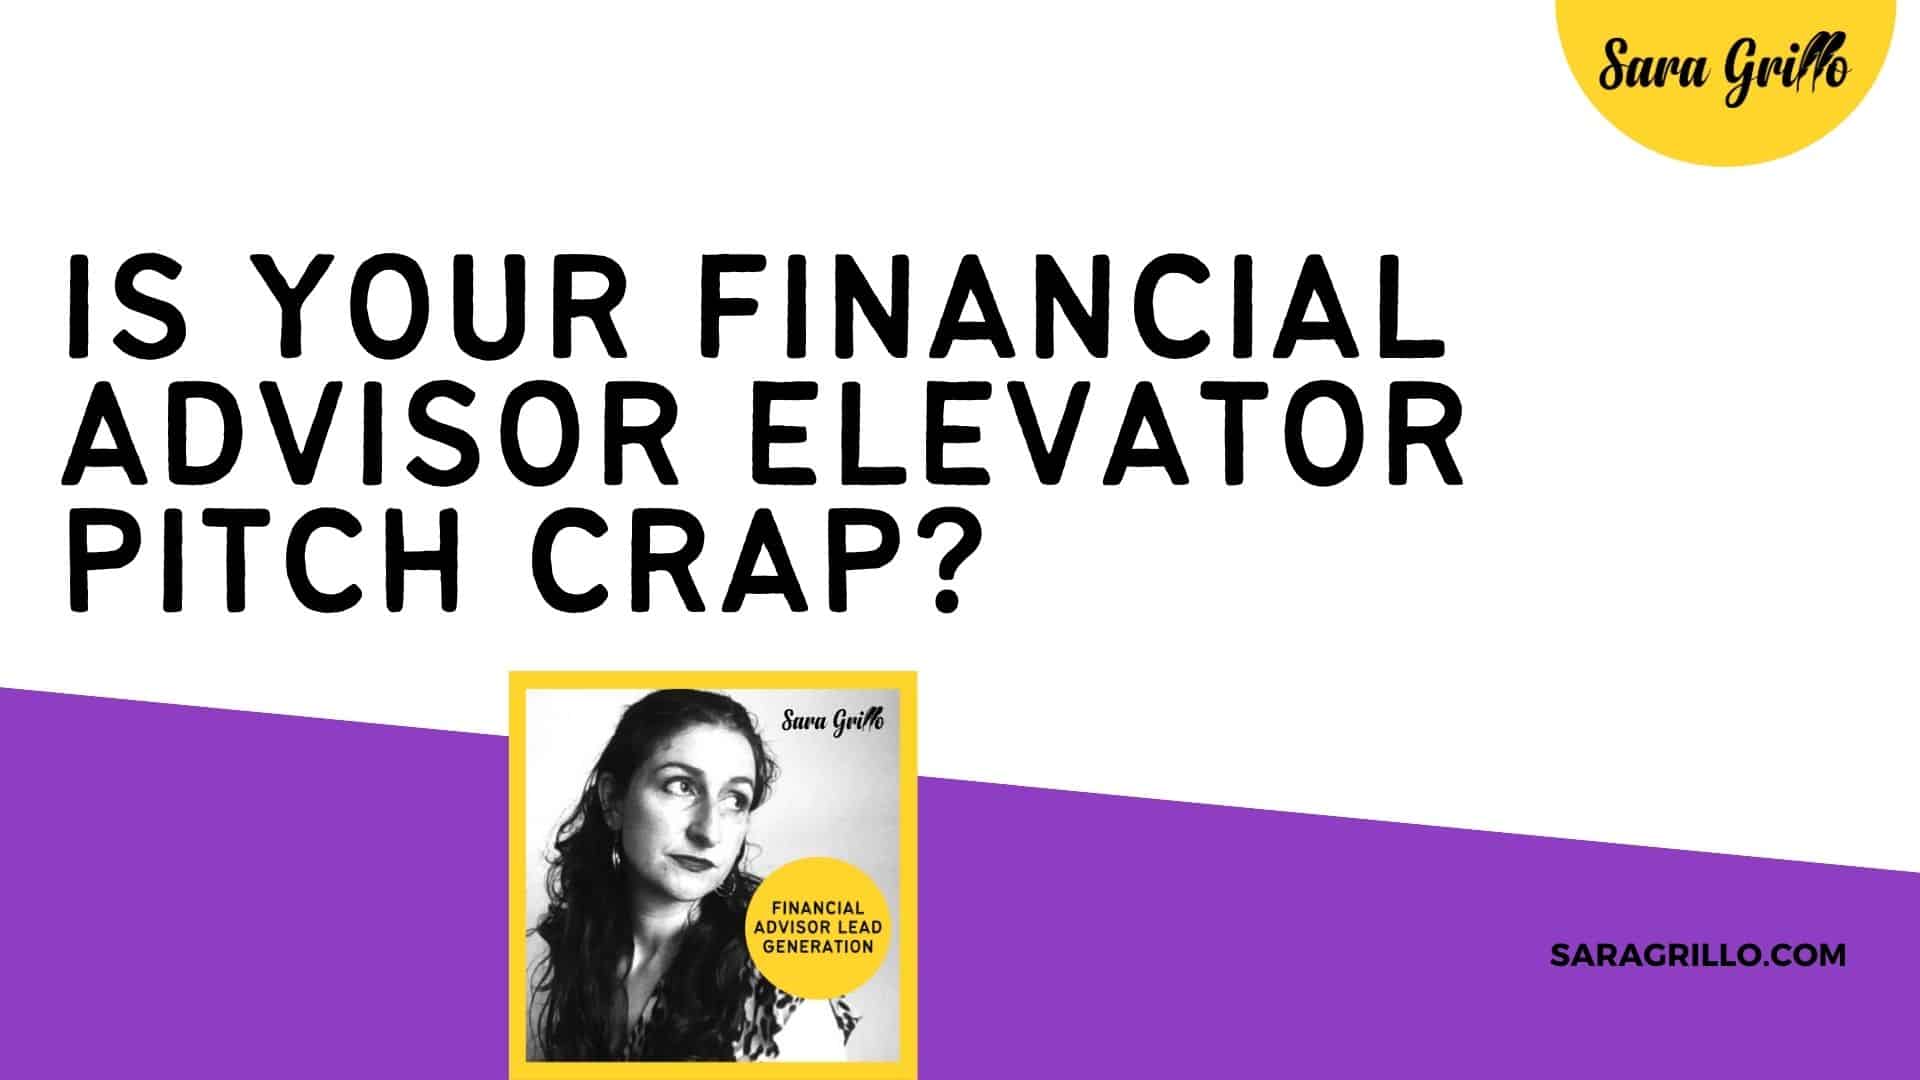 Avoid the financial advisor elevator pitch crap by using these examples